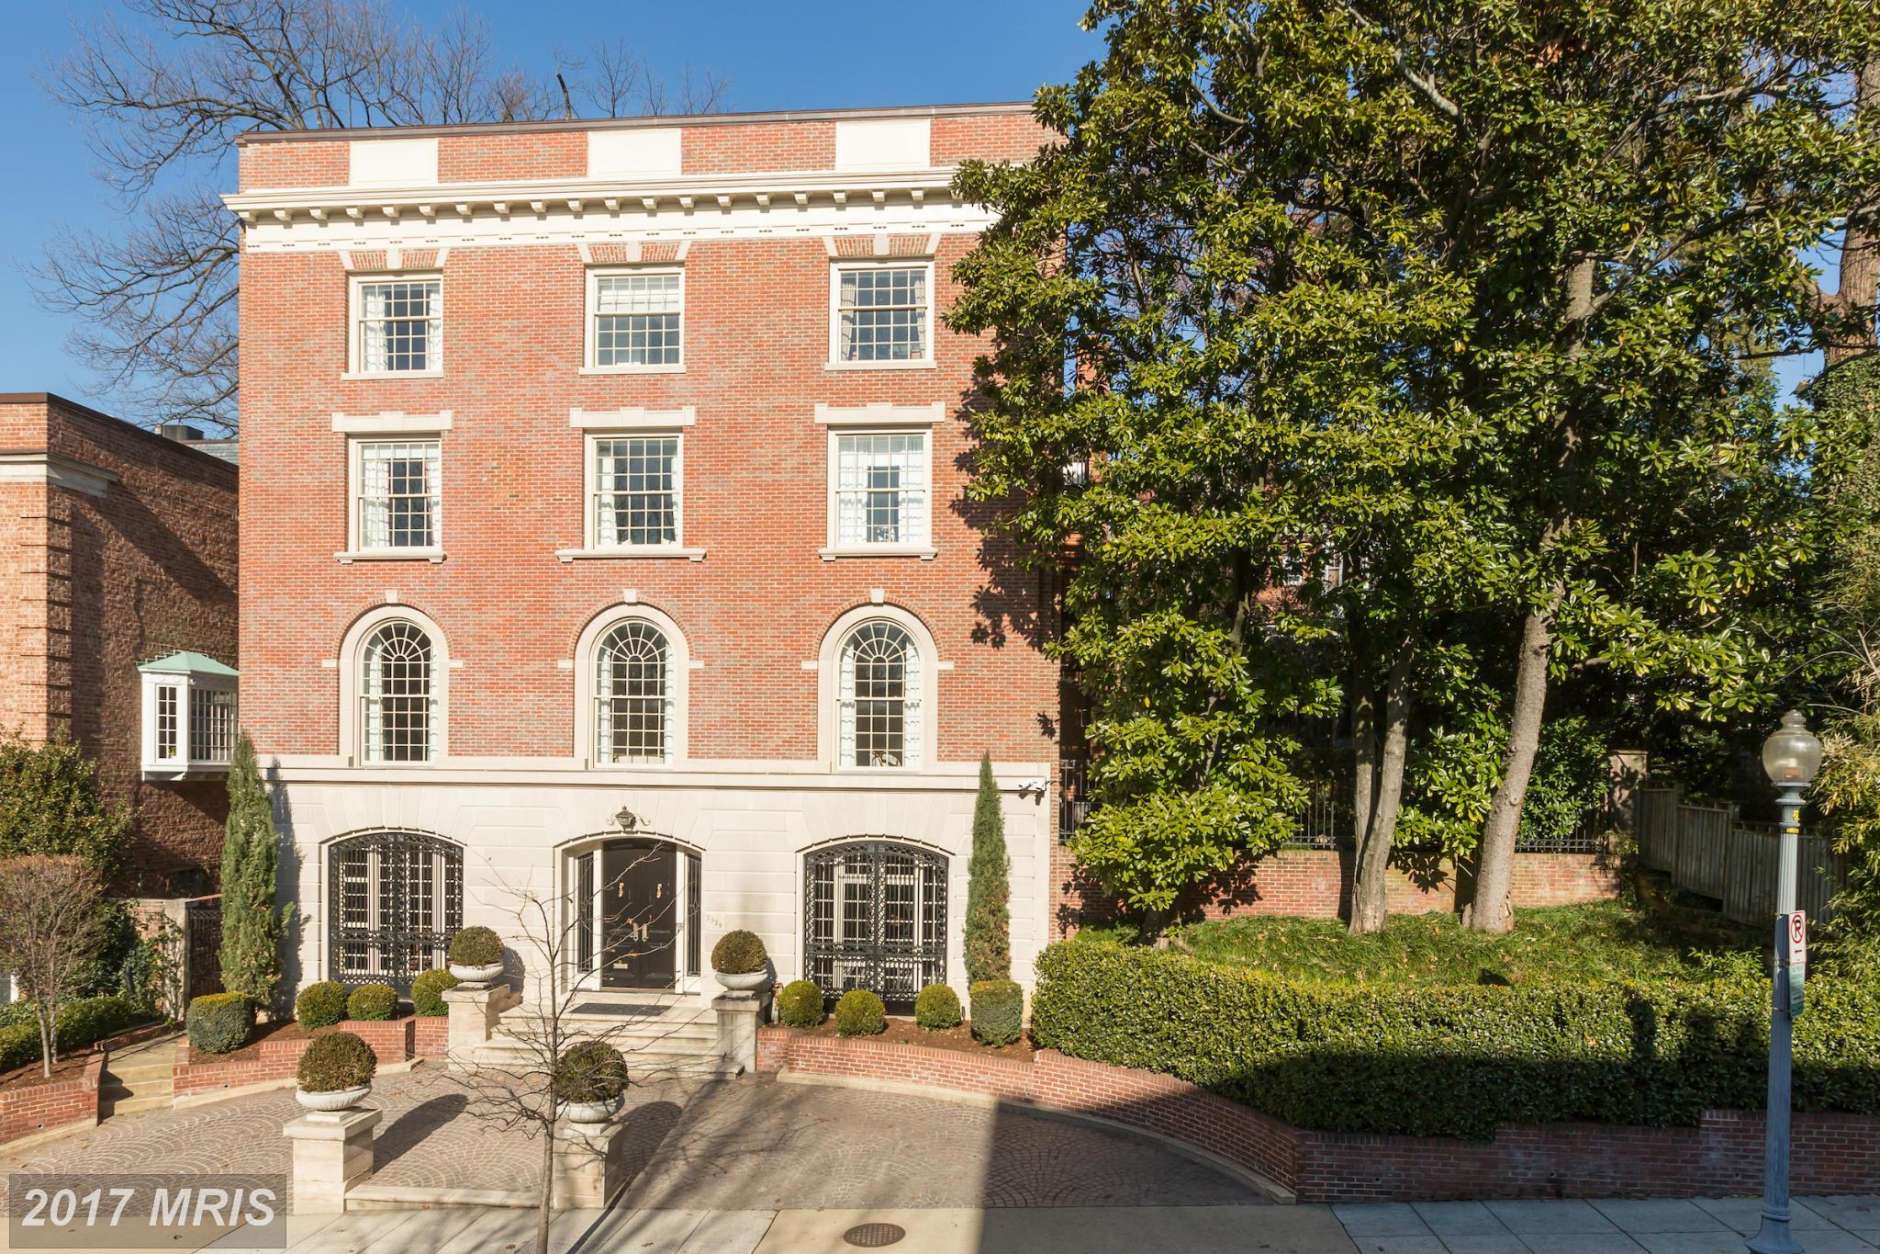 2. $5,500,000

2329 California St. NW, Washington, D.C.

This 1919 house in Kalorama has six bedrooms, five full bathrooms and two half-baths. (Courtesy MRIS, a Bright MLS)